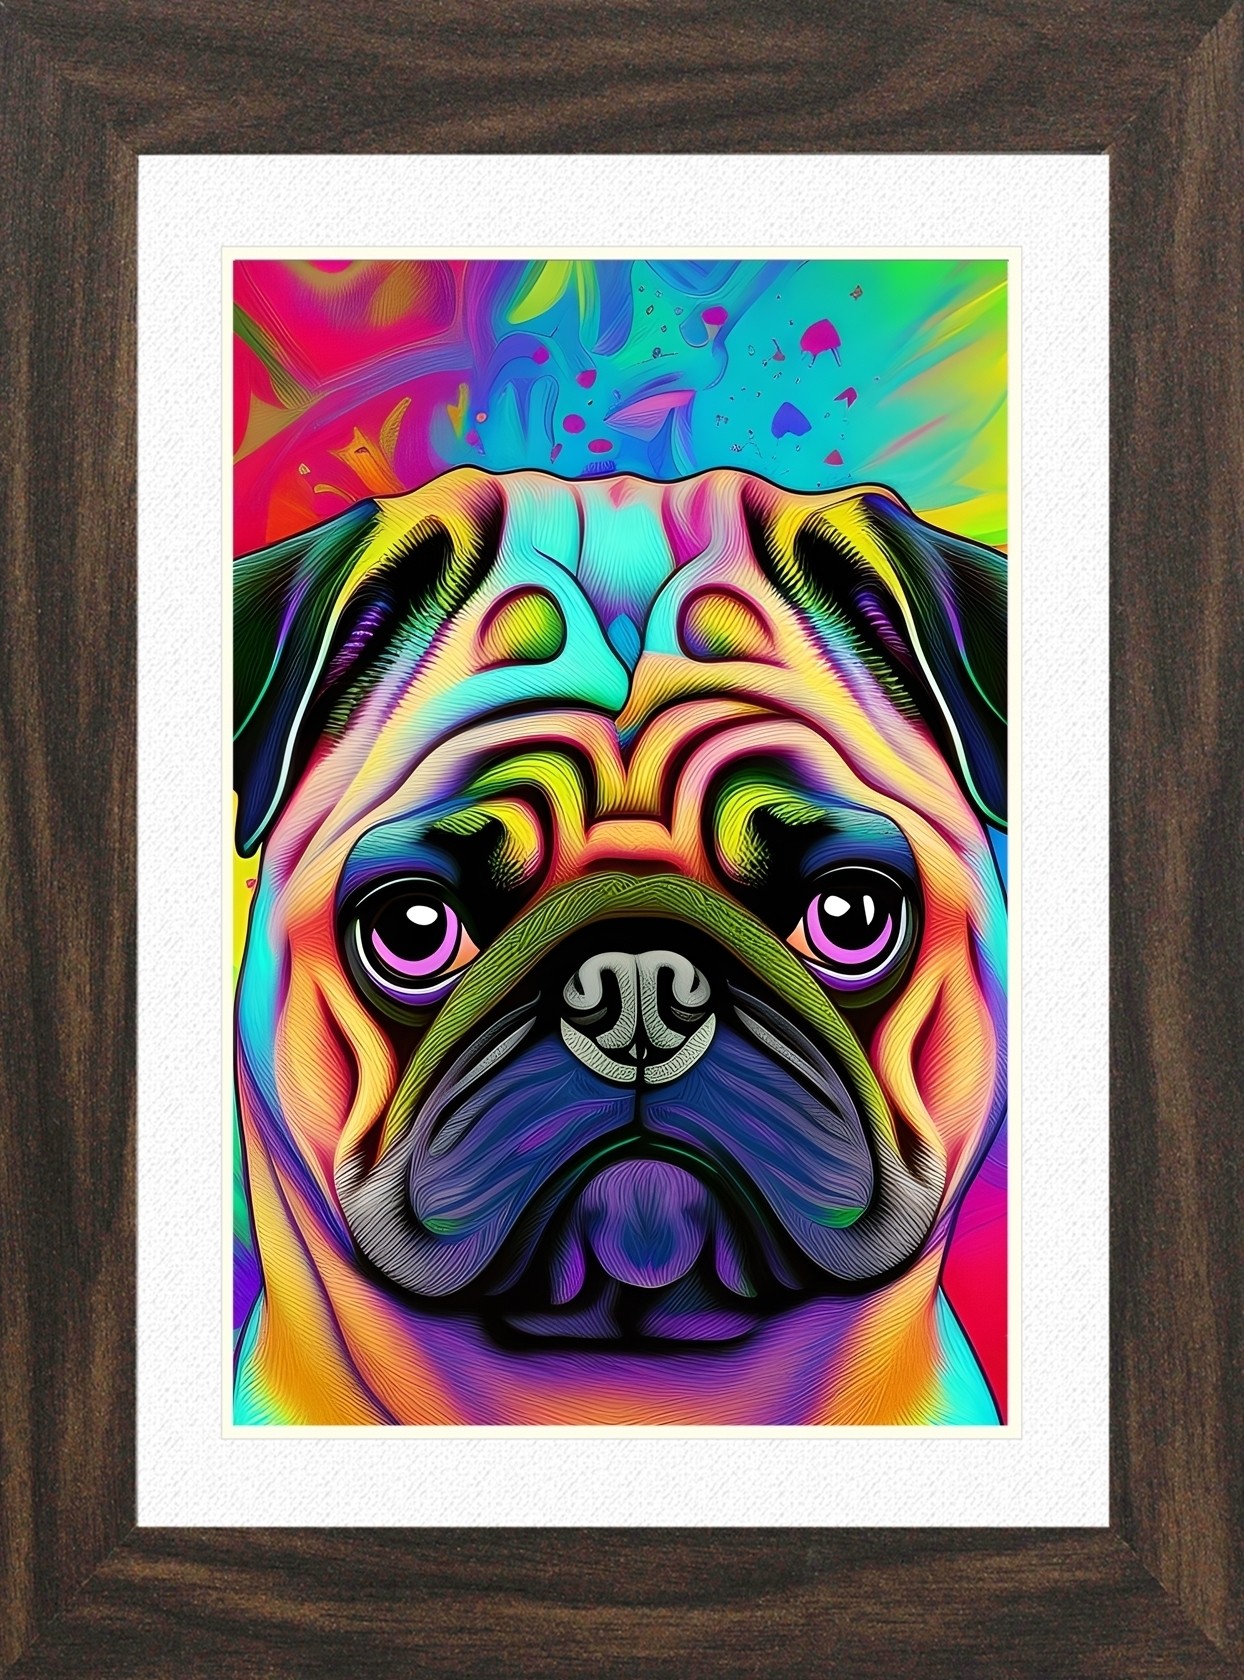 Pug Dog Picture Framed Colourful Abstract Art (25cm x 20cm Walnut Frame)